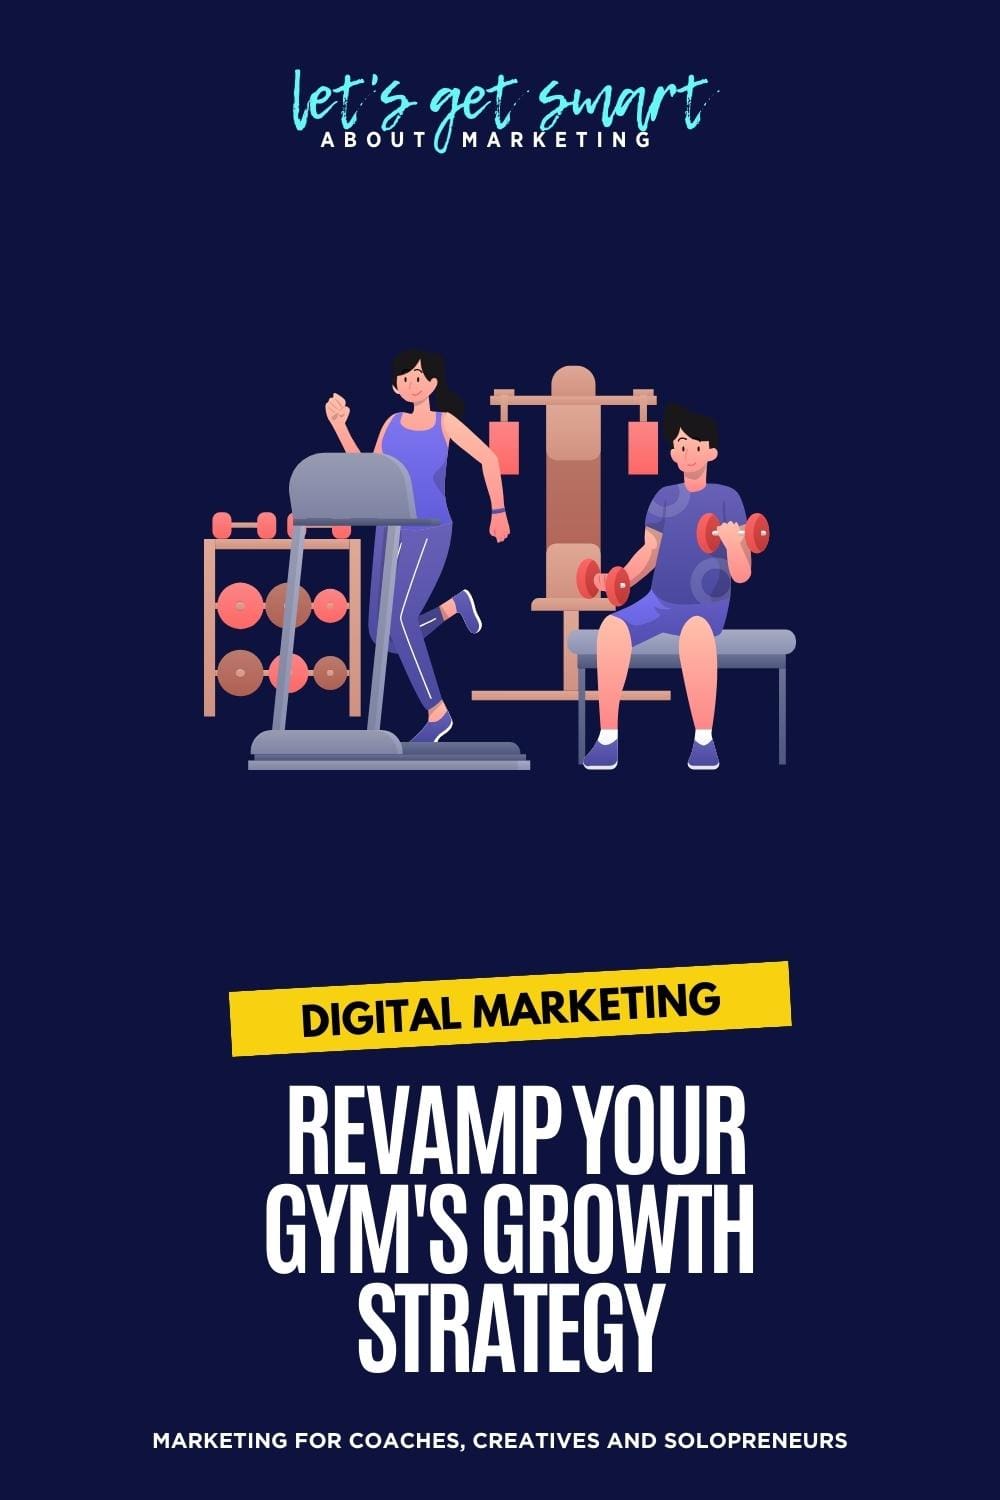 Revamp Your Gym's Growth Strategy 7 Ways To Leverage Email Marketing